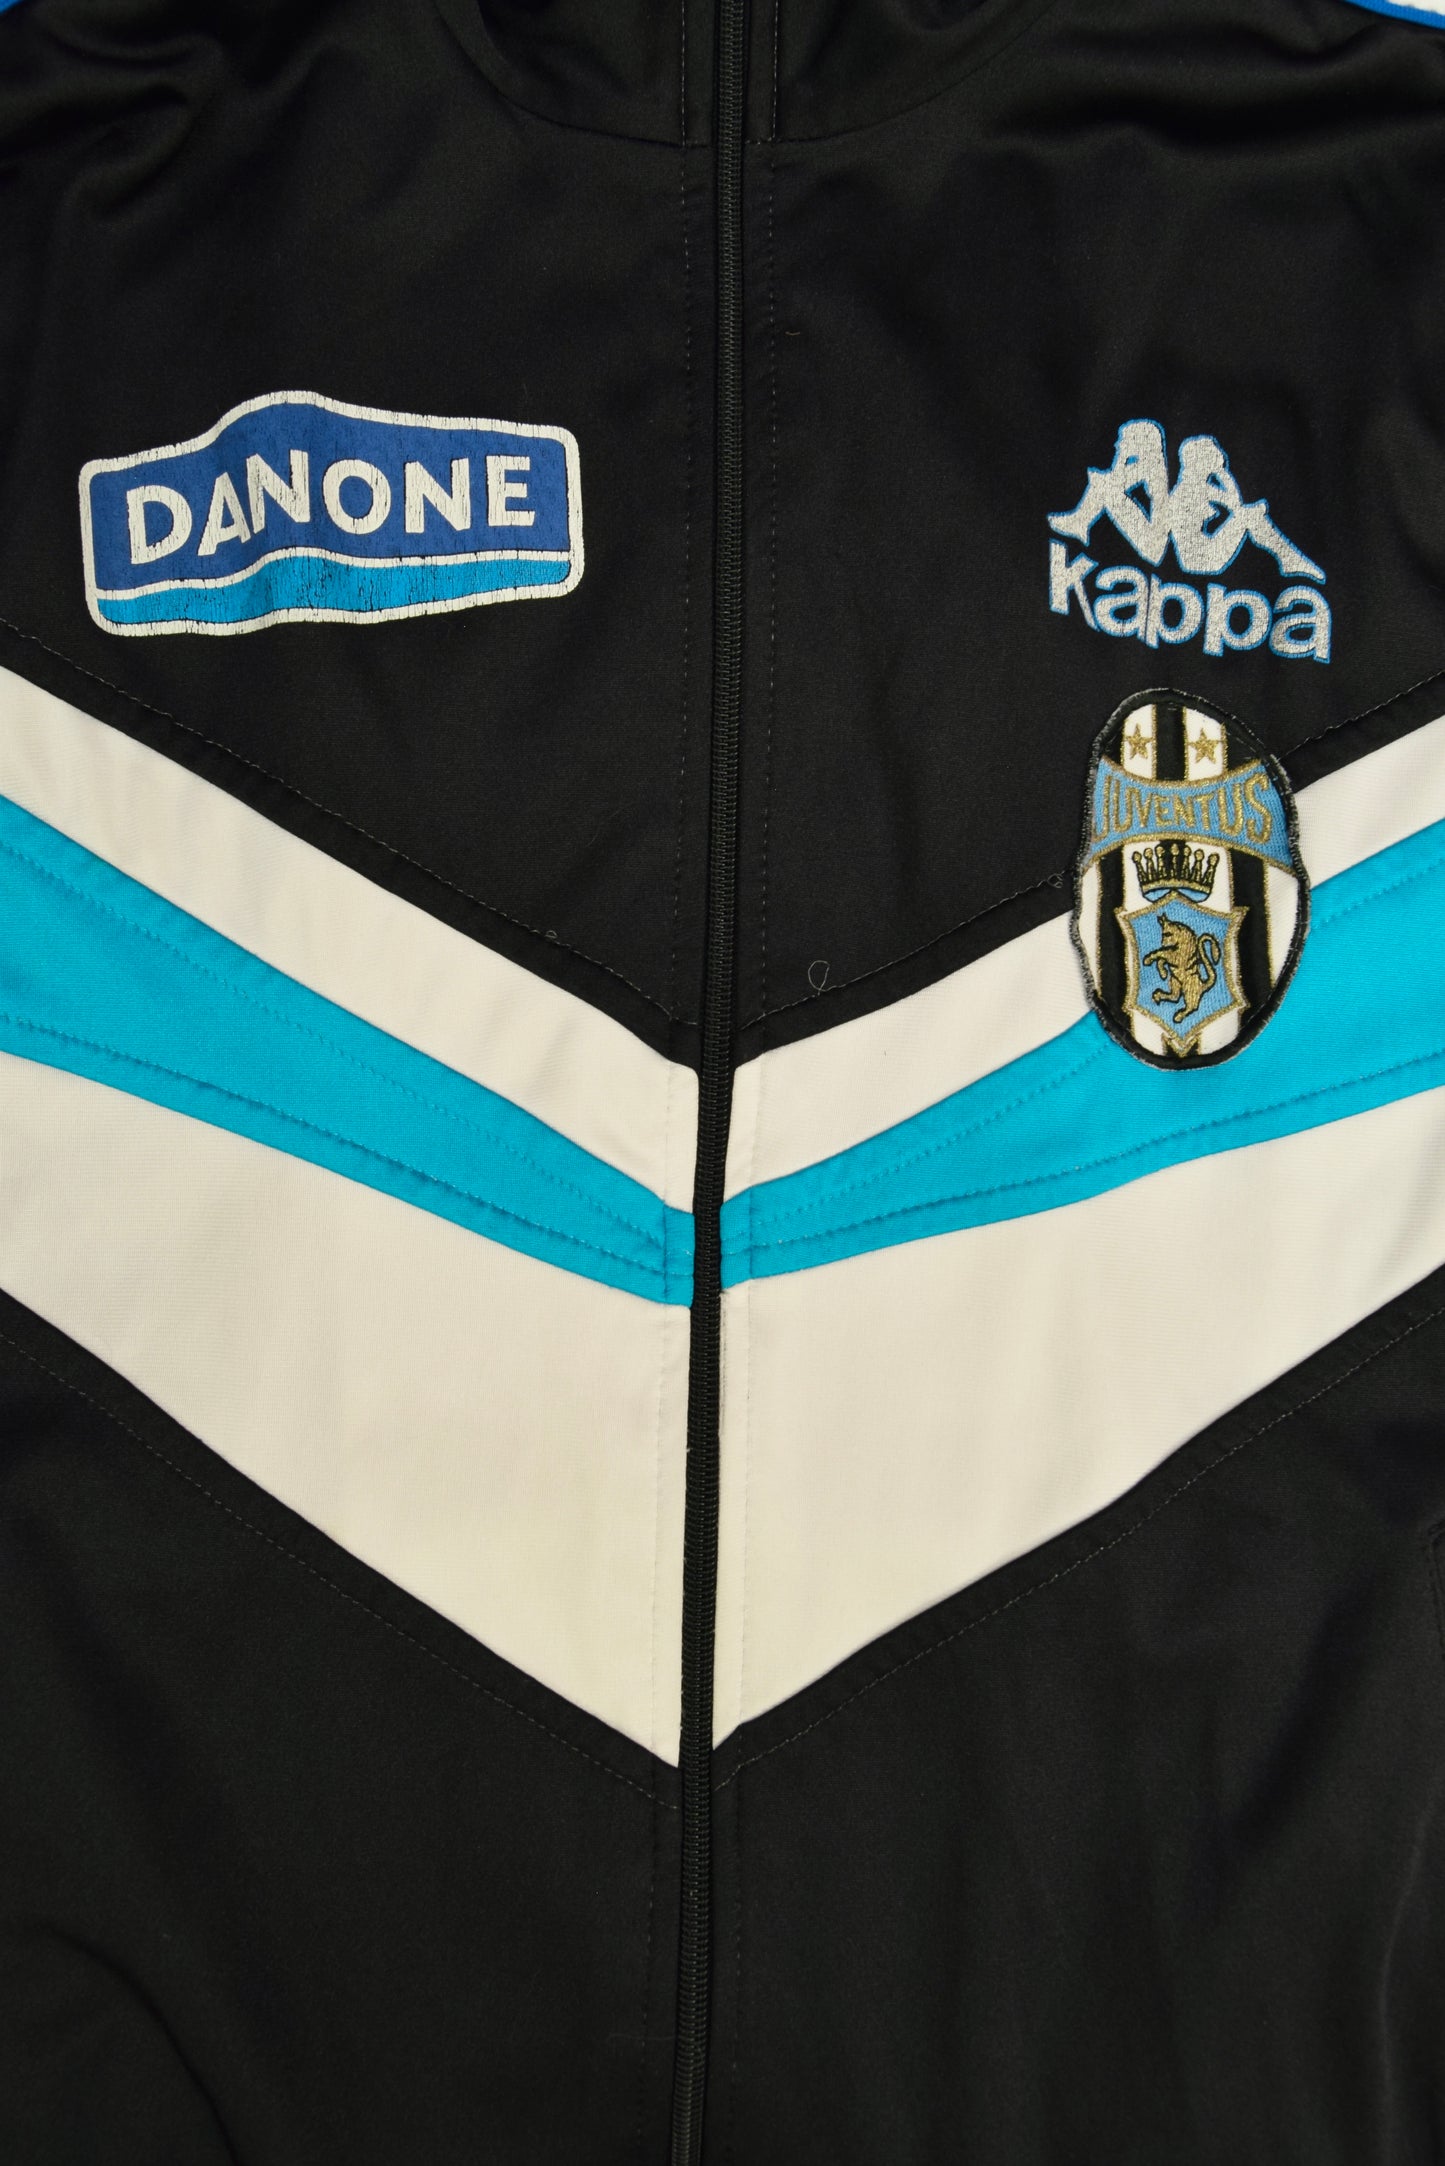 Juventus Kappa 1992  1993 1994 Presentation Football TrackSuit Size L Made in Italy Black Blue White Danone